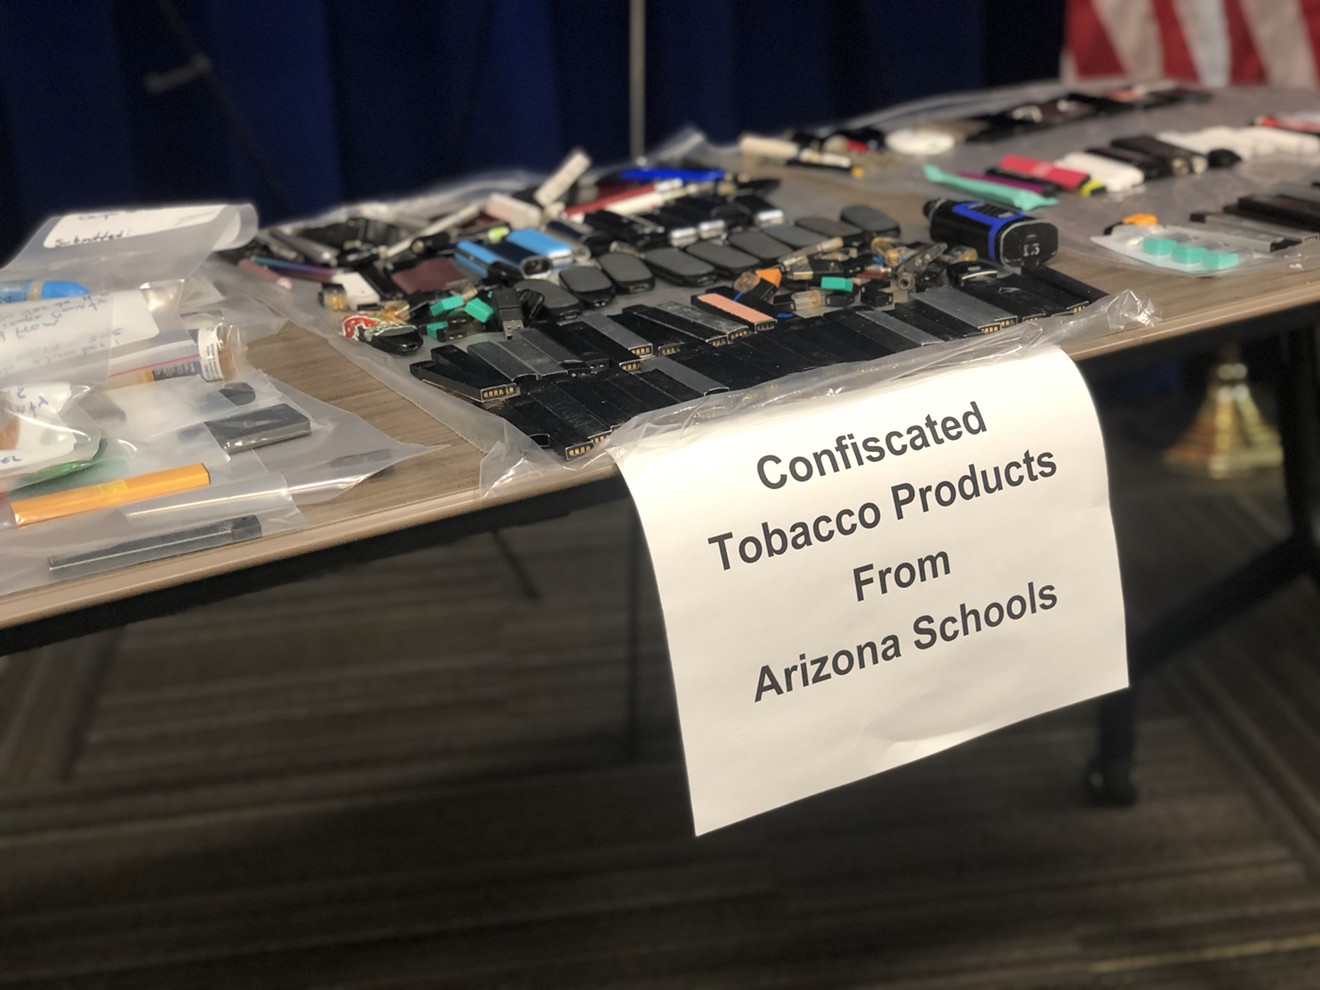 Plastic bags full of vaping products confiscated from Arizona high schools sit on display at a press conference Tuesday.